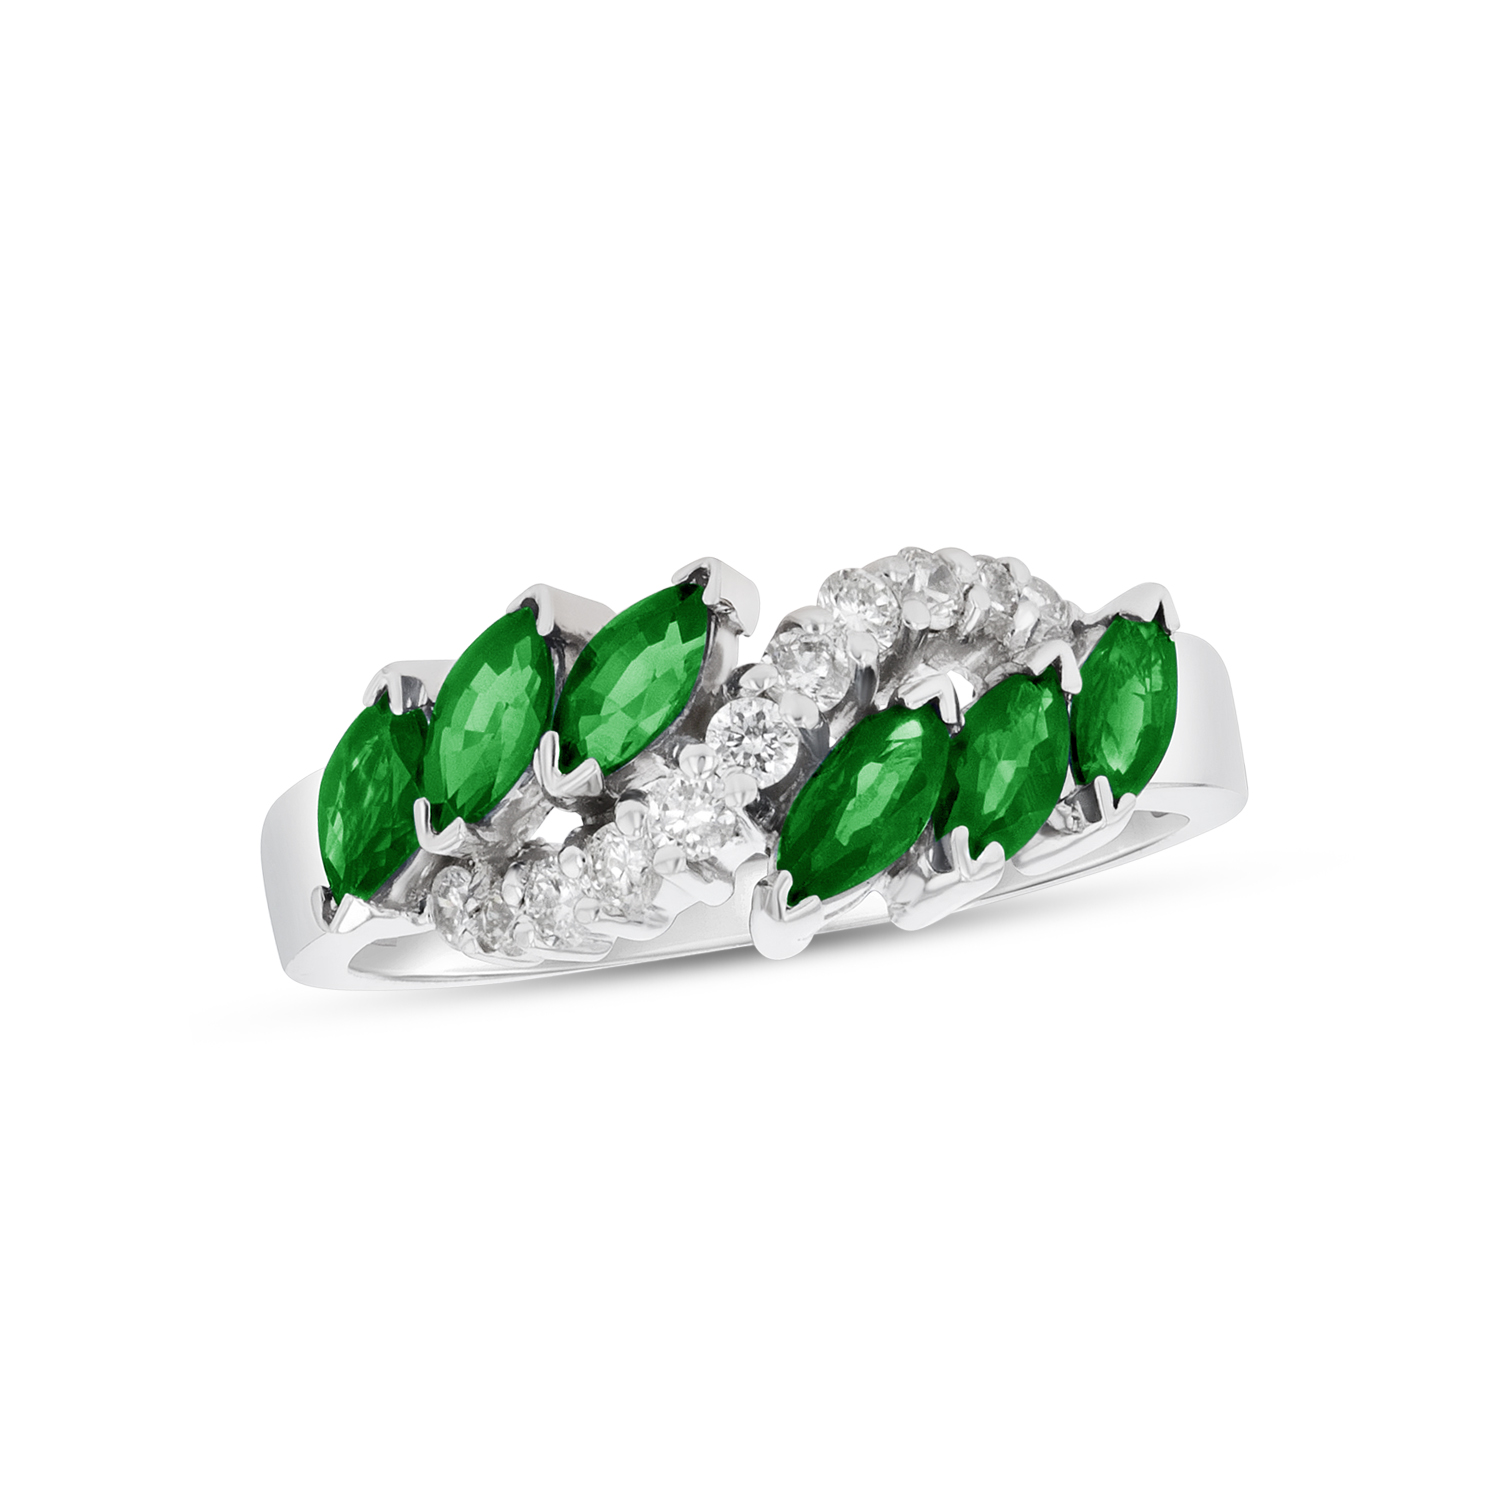 View 1.15ctw Diamond and Emerald Fashion Ring in 14k White Gold